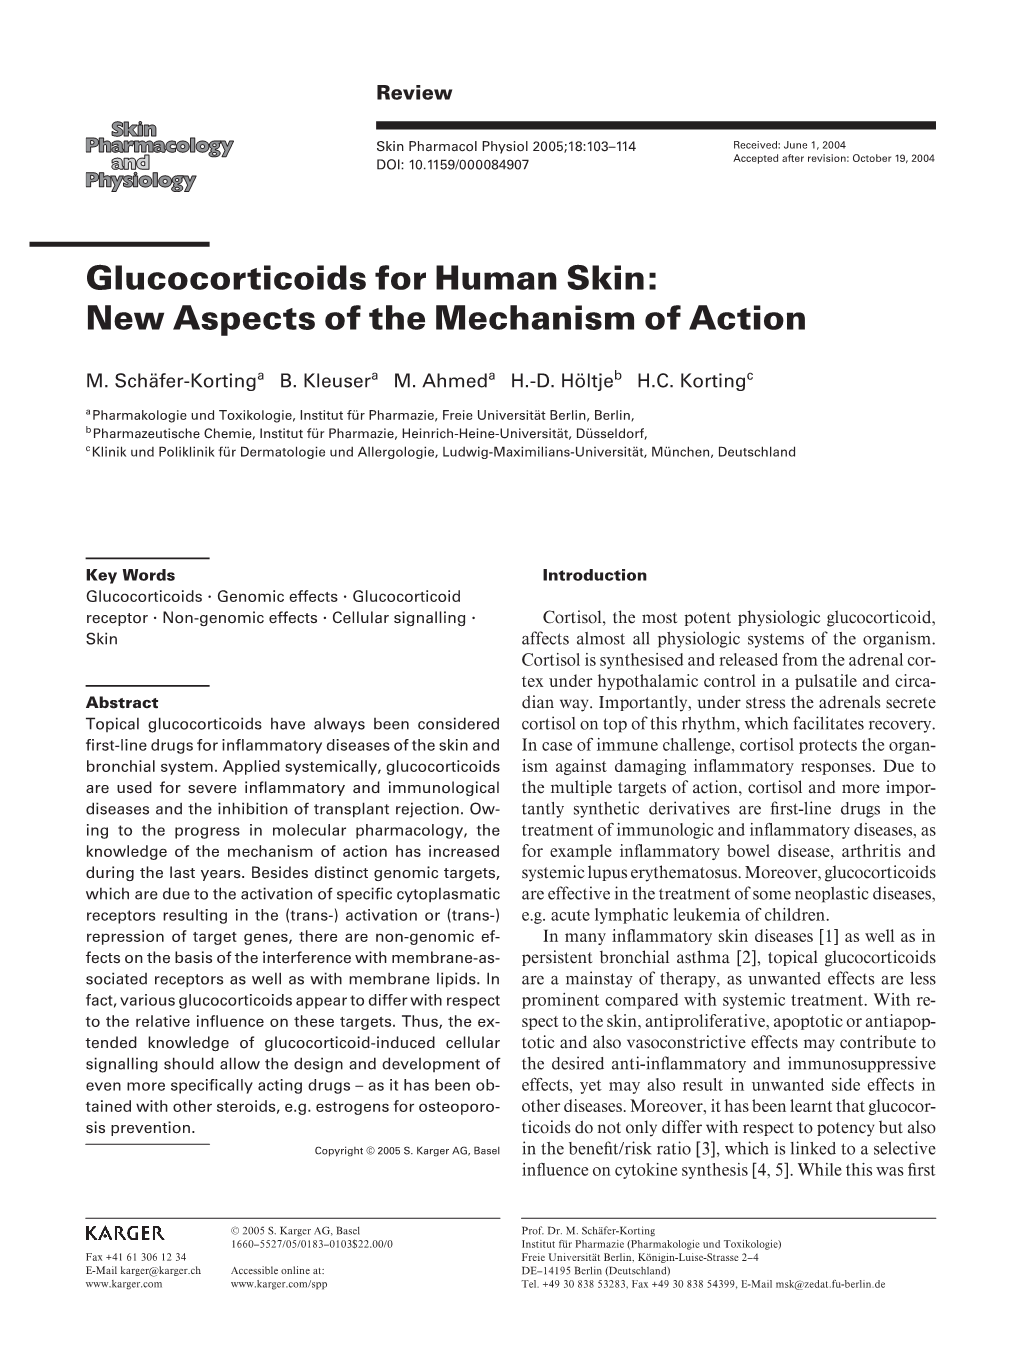 Glucocorticoids for Human Skin: New Aspects of the Mechanism of Action